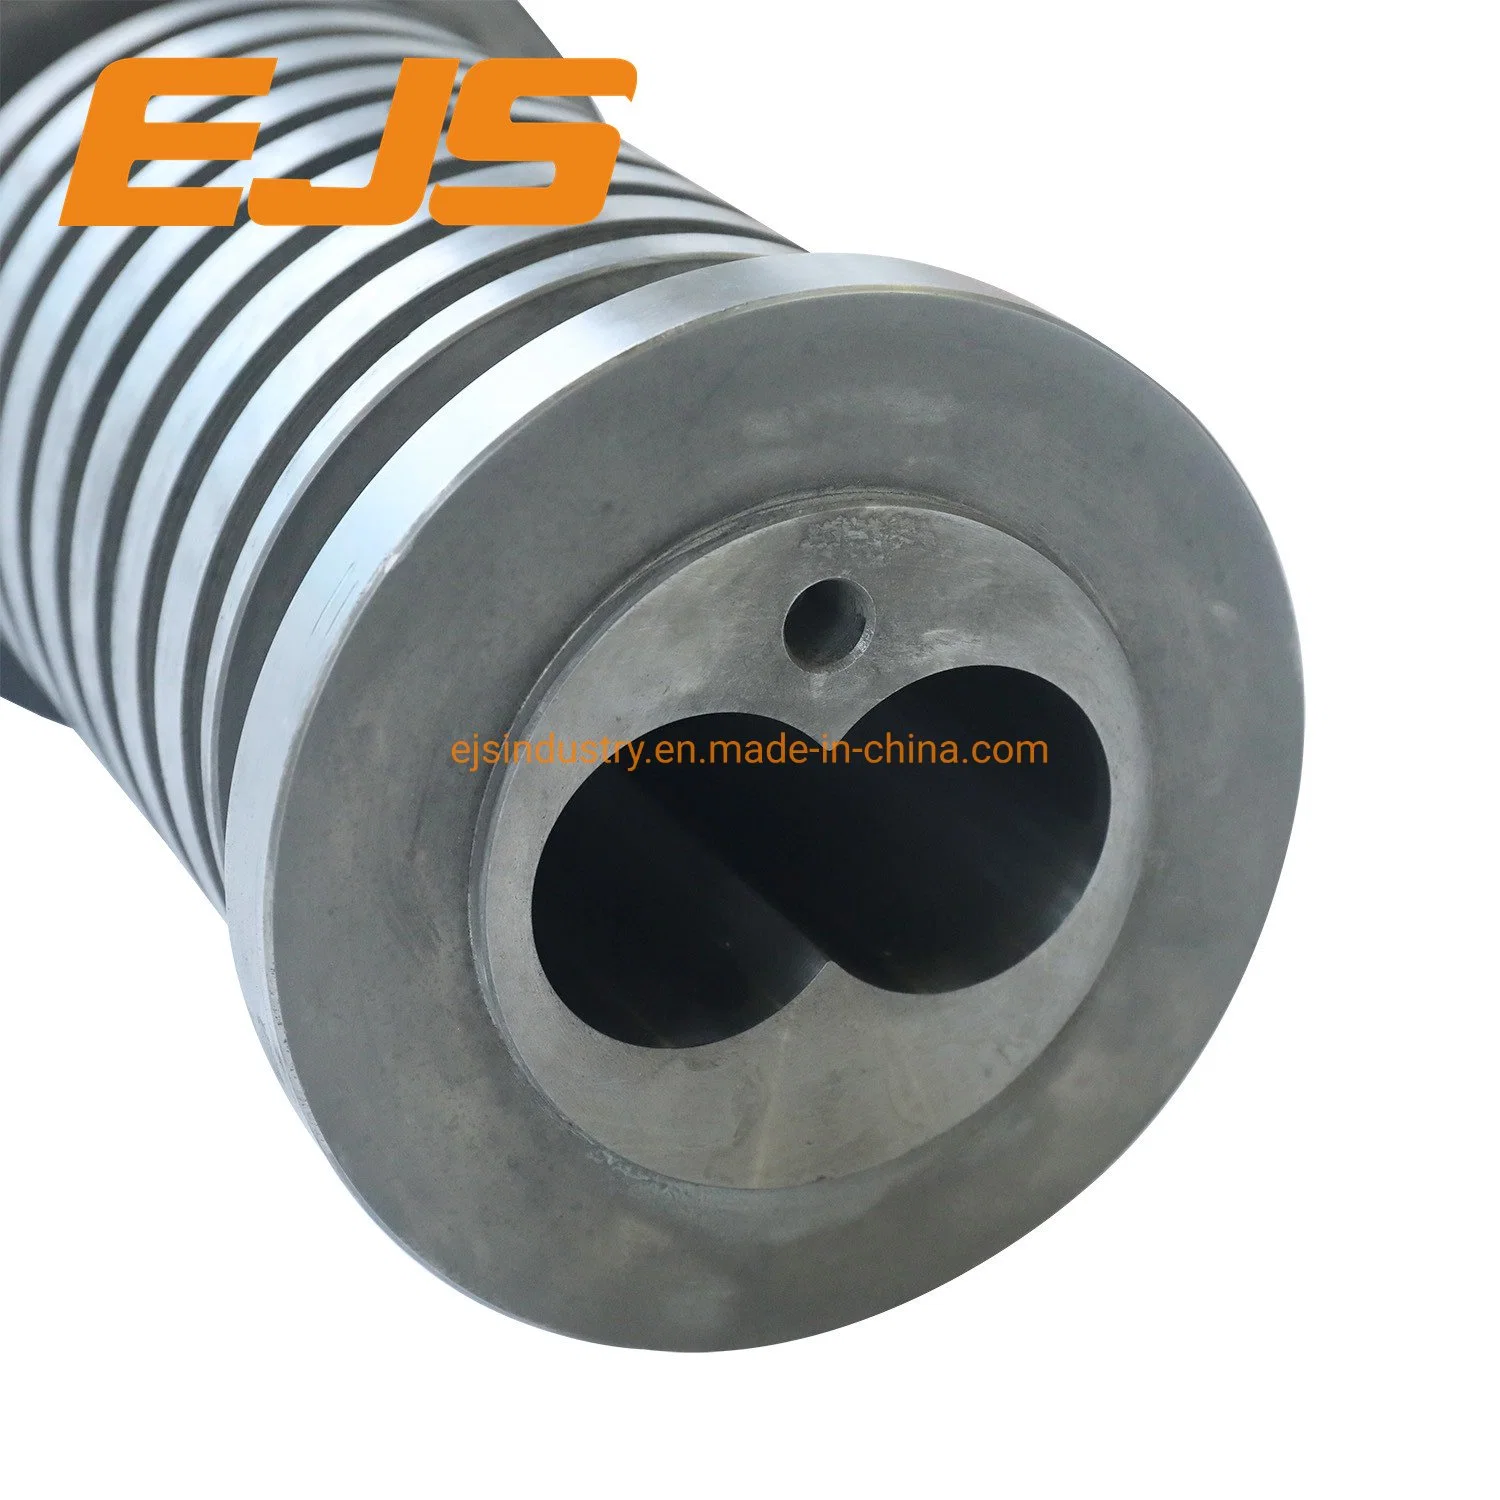 Quality Conical Twin Screw and Barrel for Recycling Making Extrusion Machine